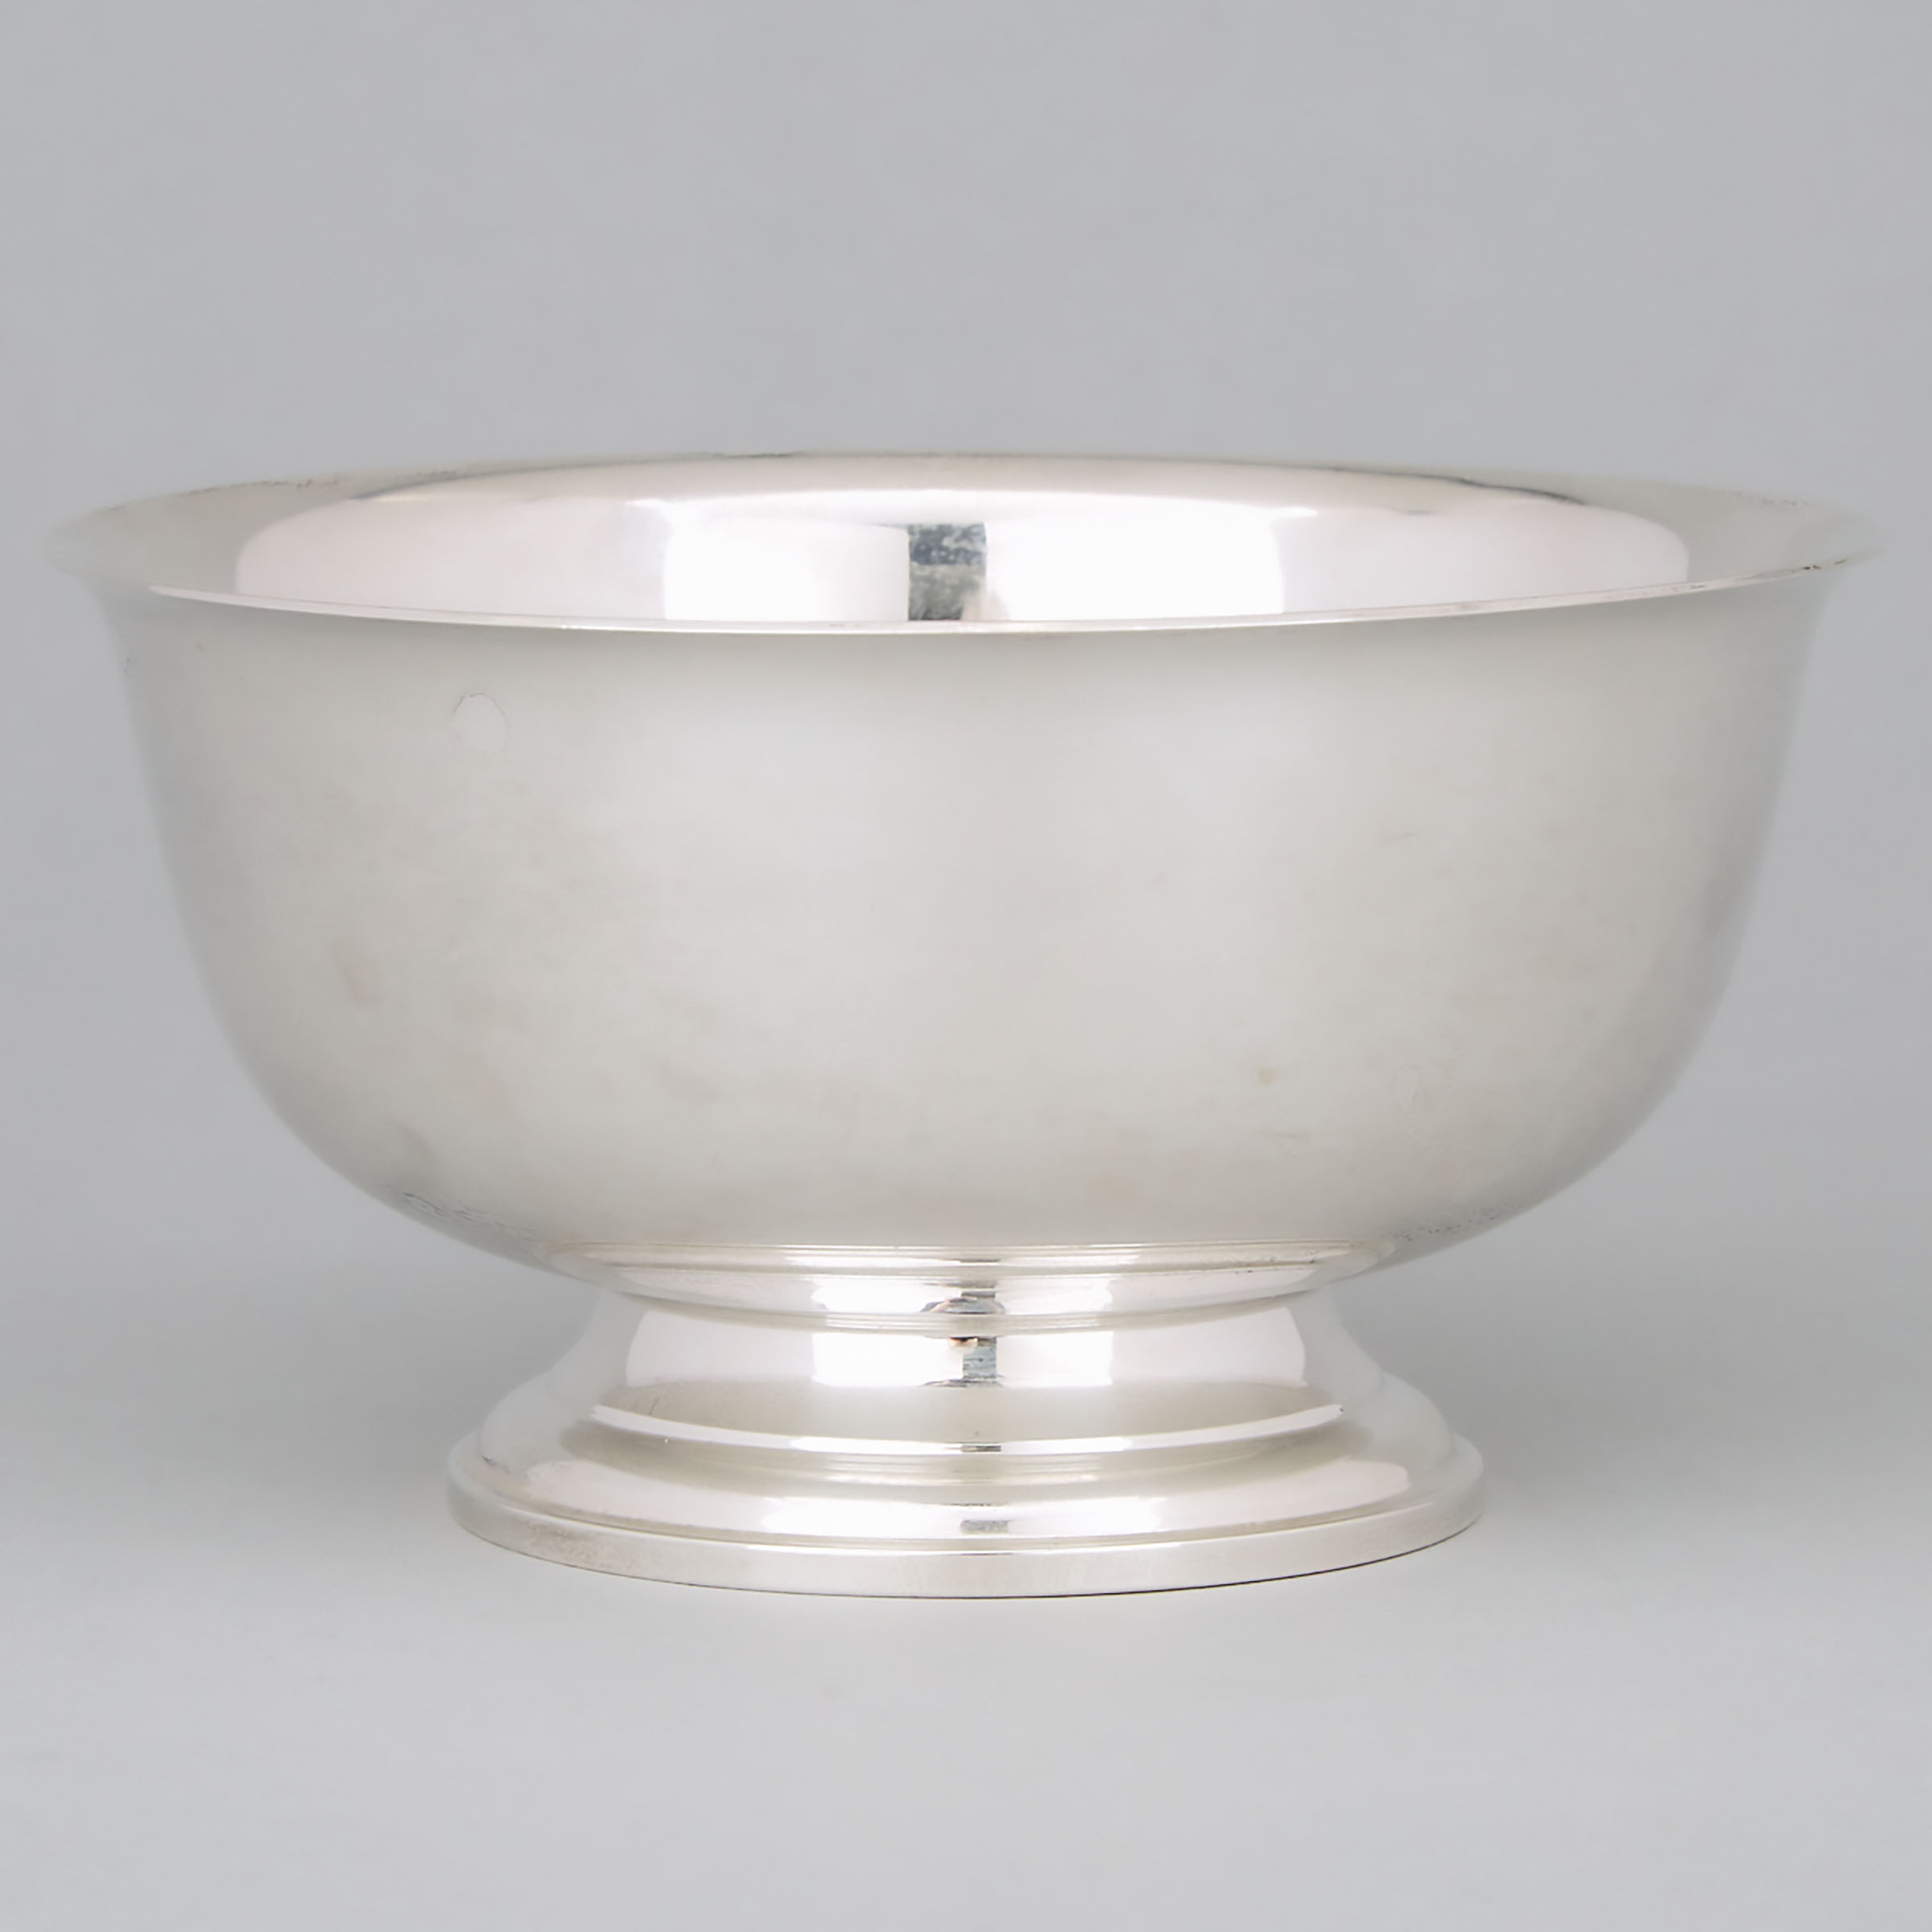 American Silver 'Newport' Footed Bowl, Gorham Mfg. Co., Providence, R.I., 20th century